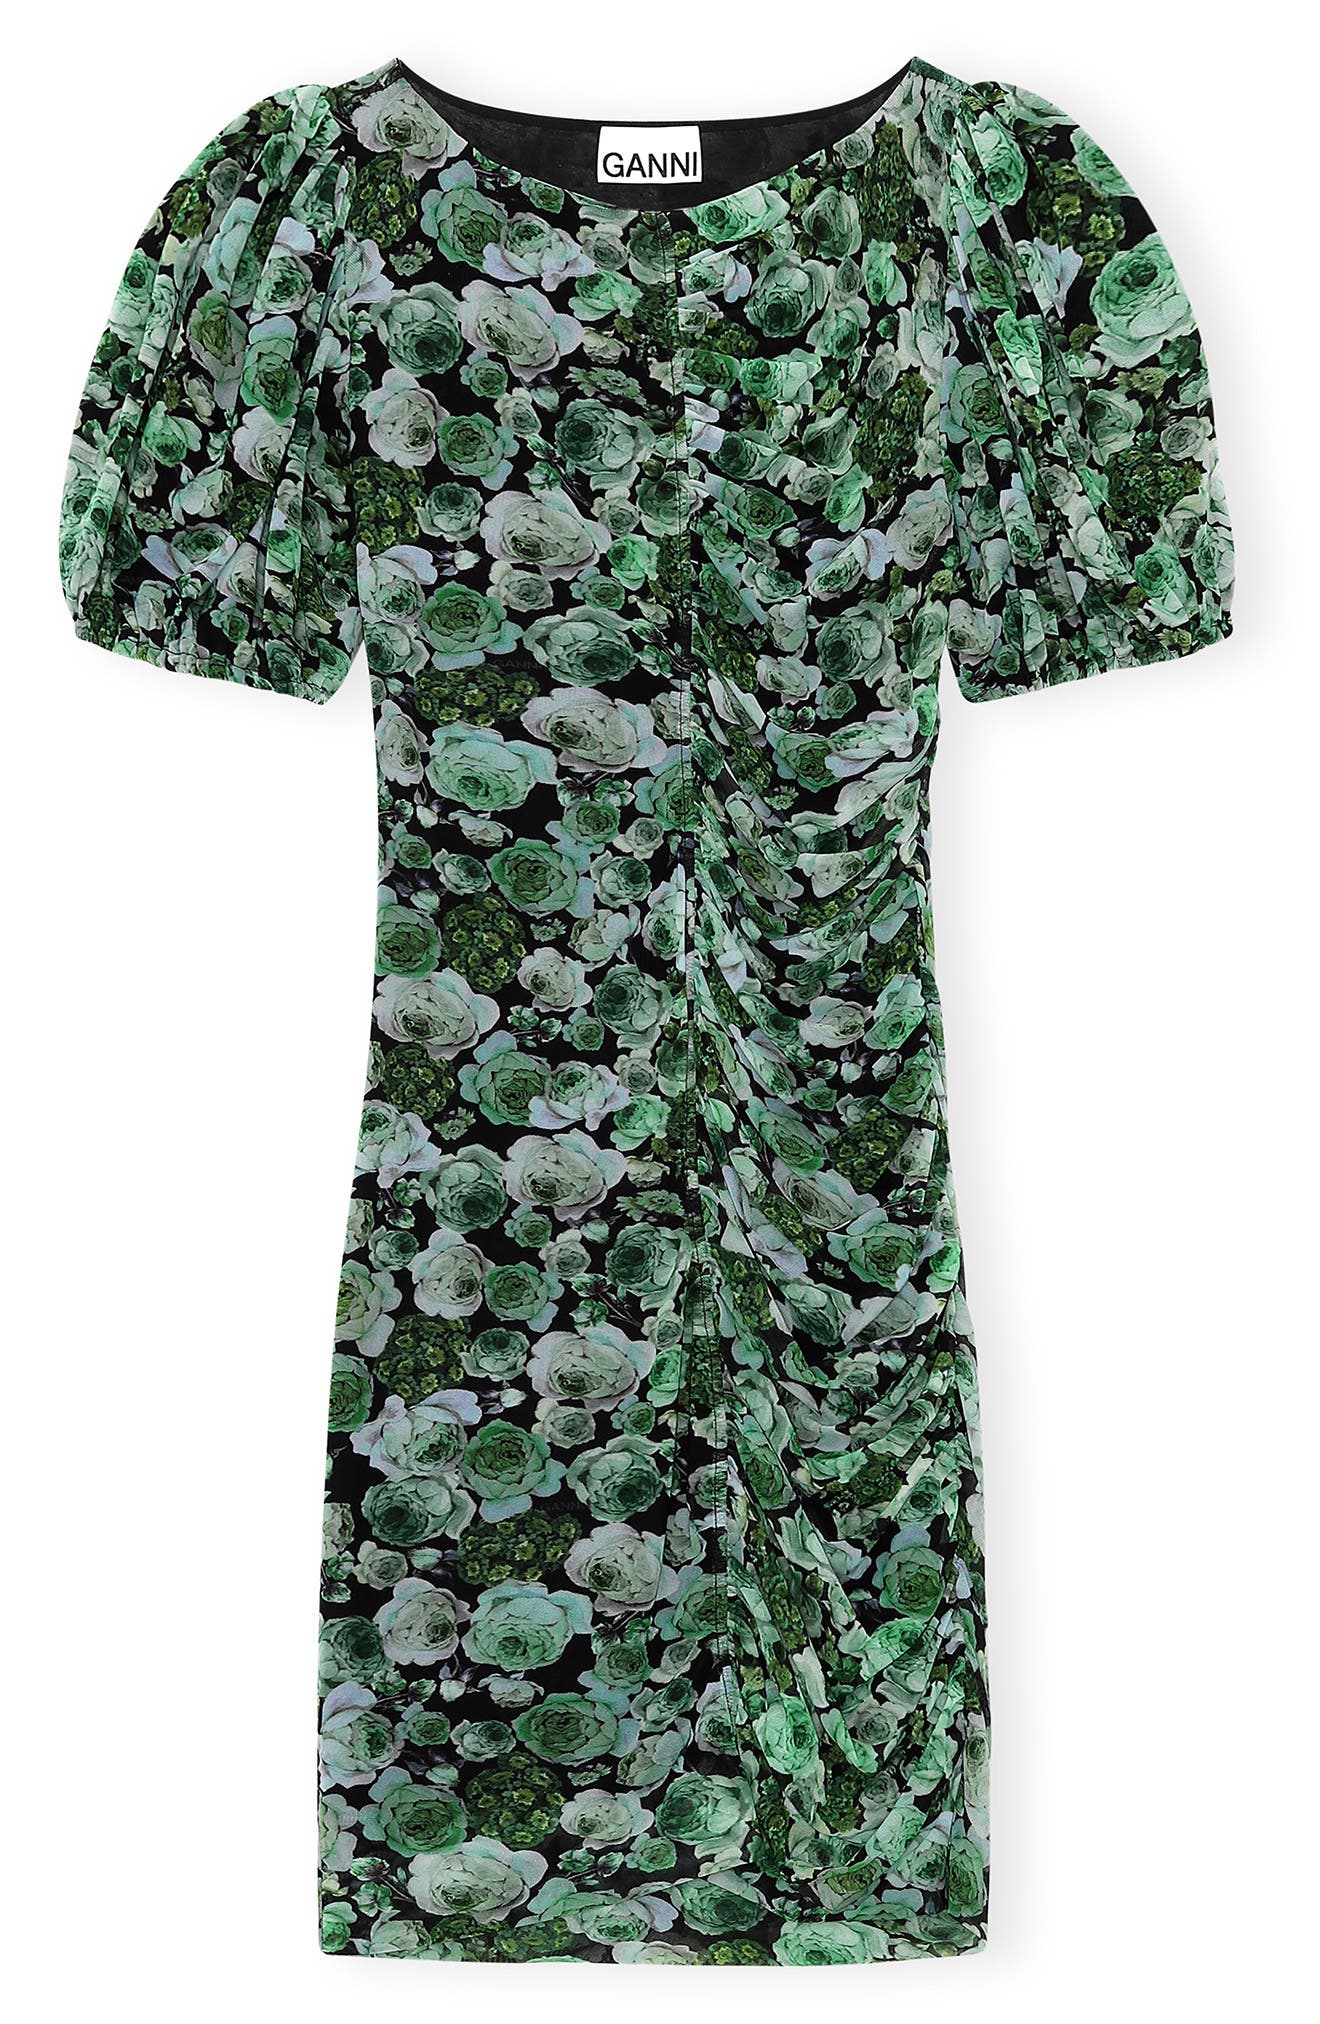 Ganni Ruched Floral Mesh Dress in Kelly Green at Nordstrom, Size 4 Us